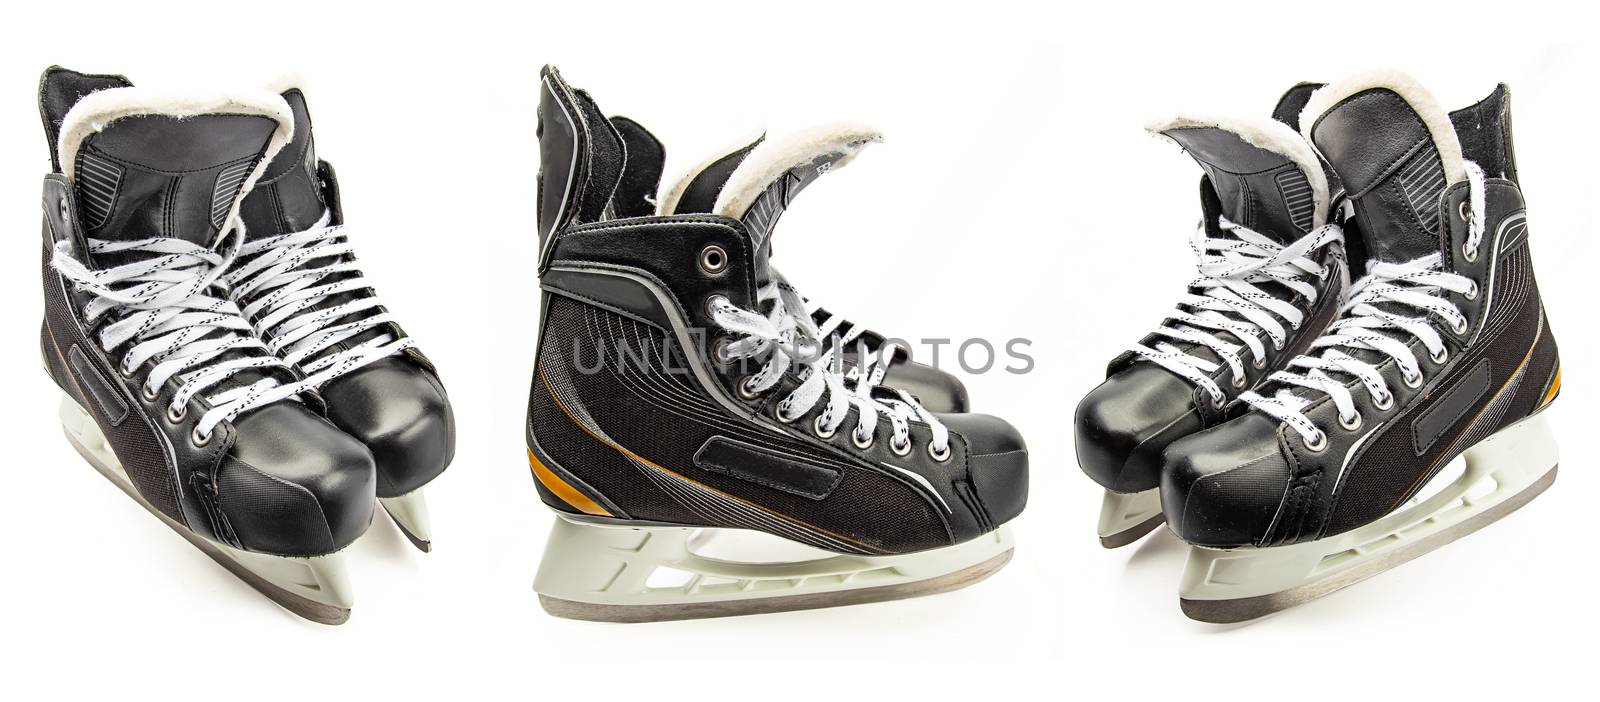 Male ice skate isolate against white background